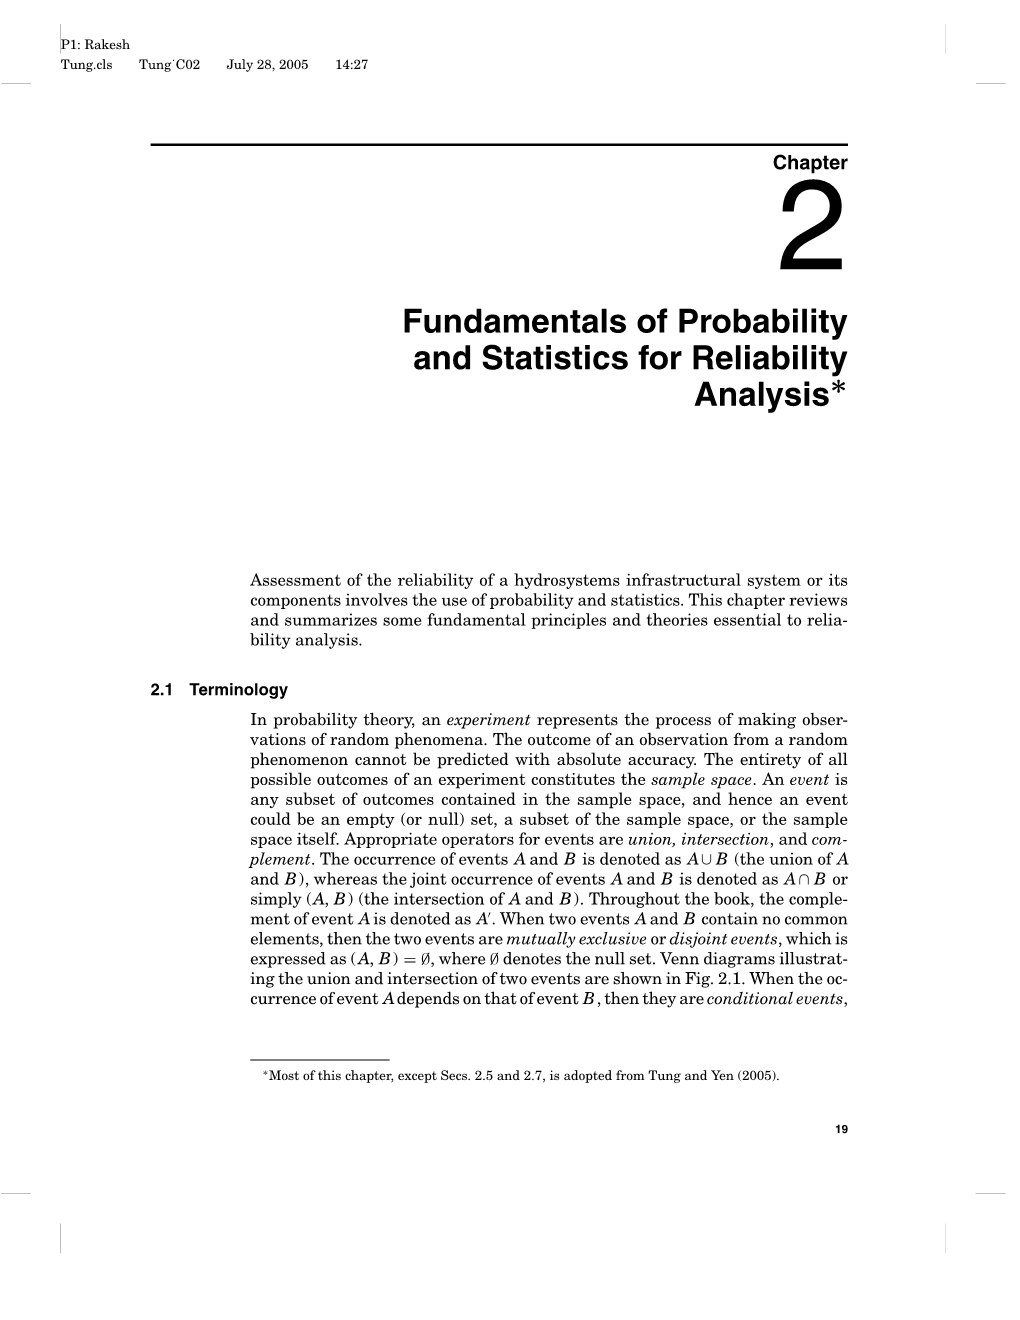 Fundamentals of Probability and Statistics for Reliability Analysis 21